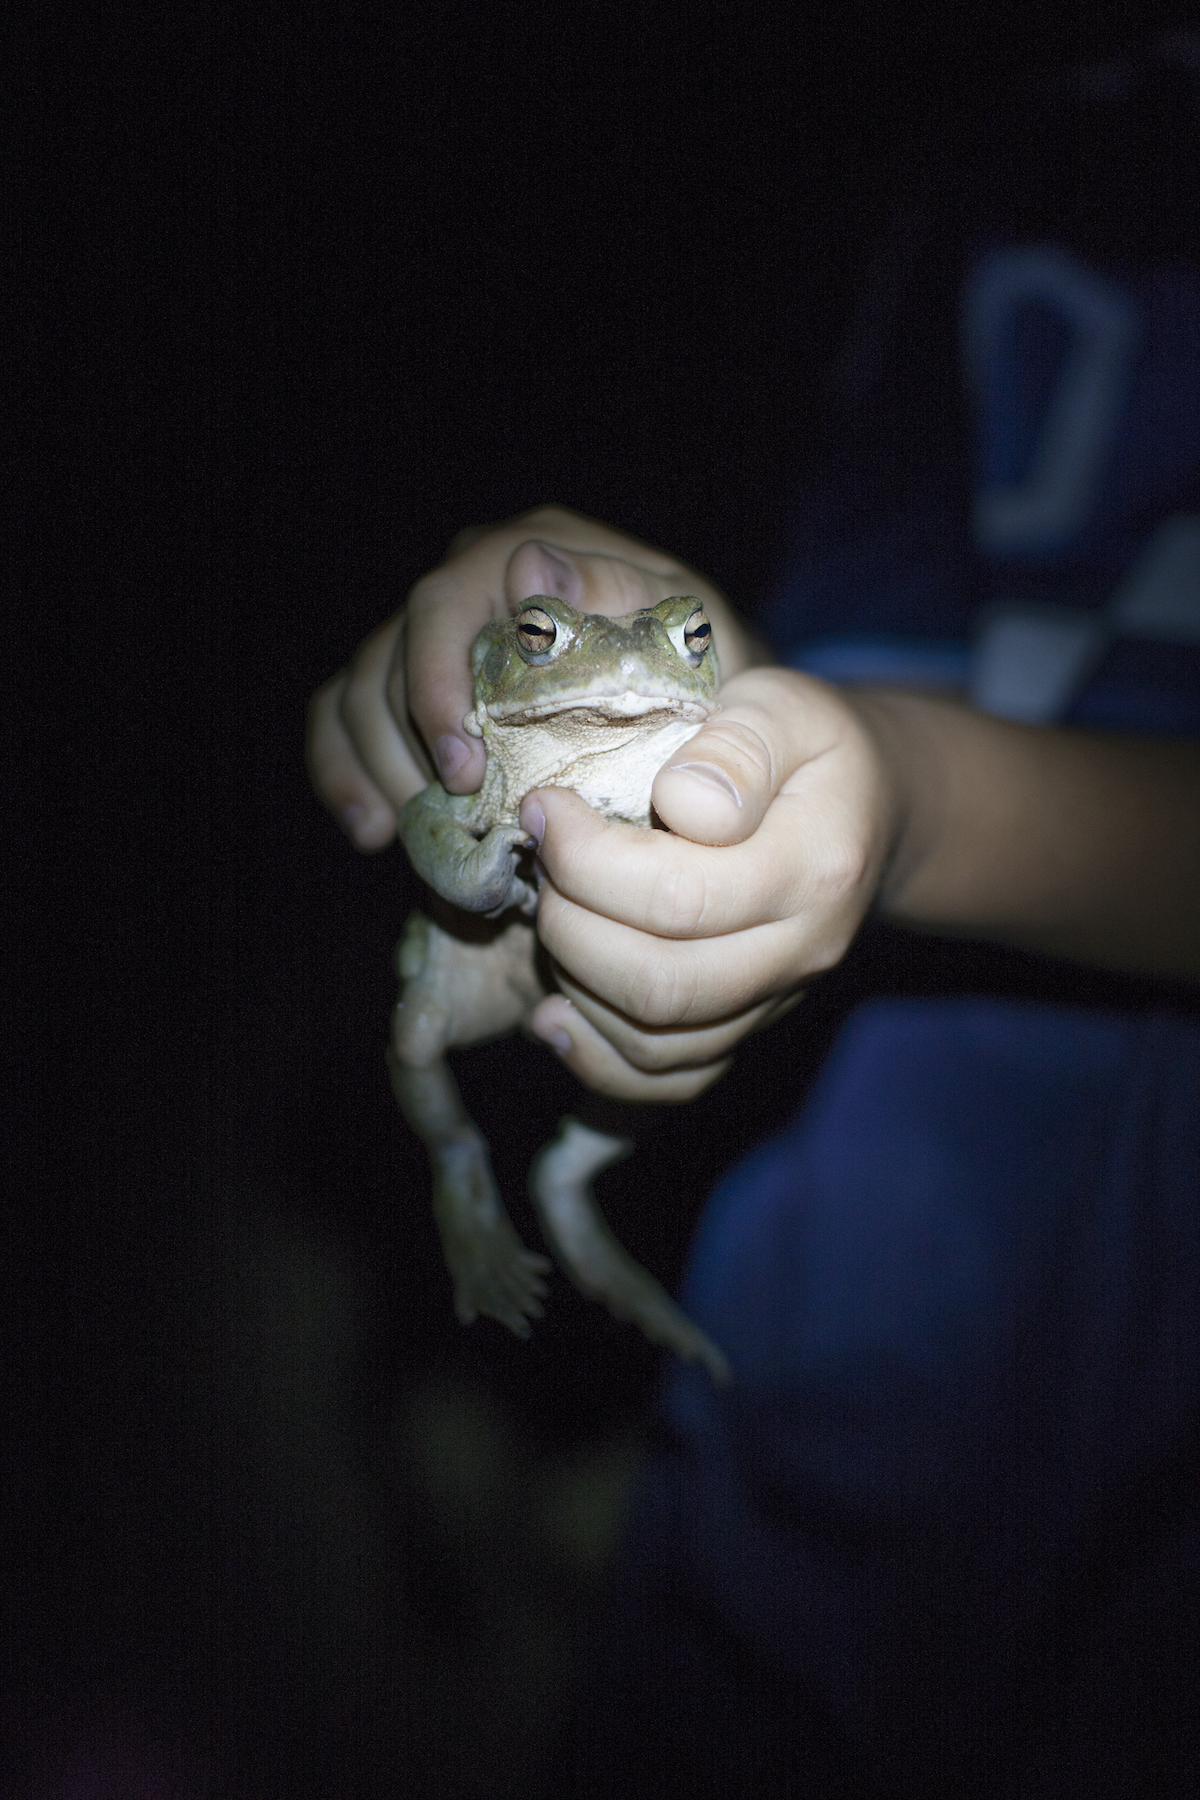 Hands holding a toad illuminated at night by torchlight.